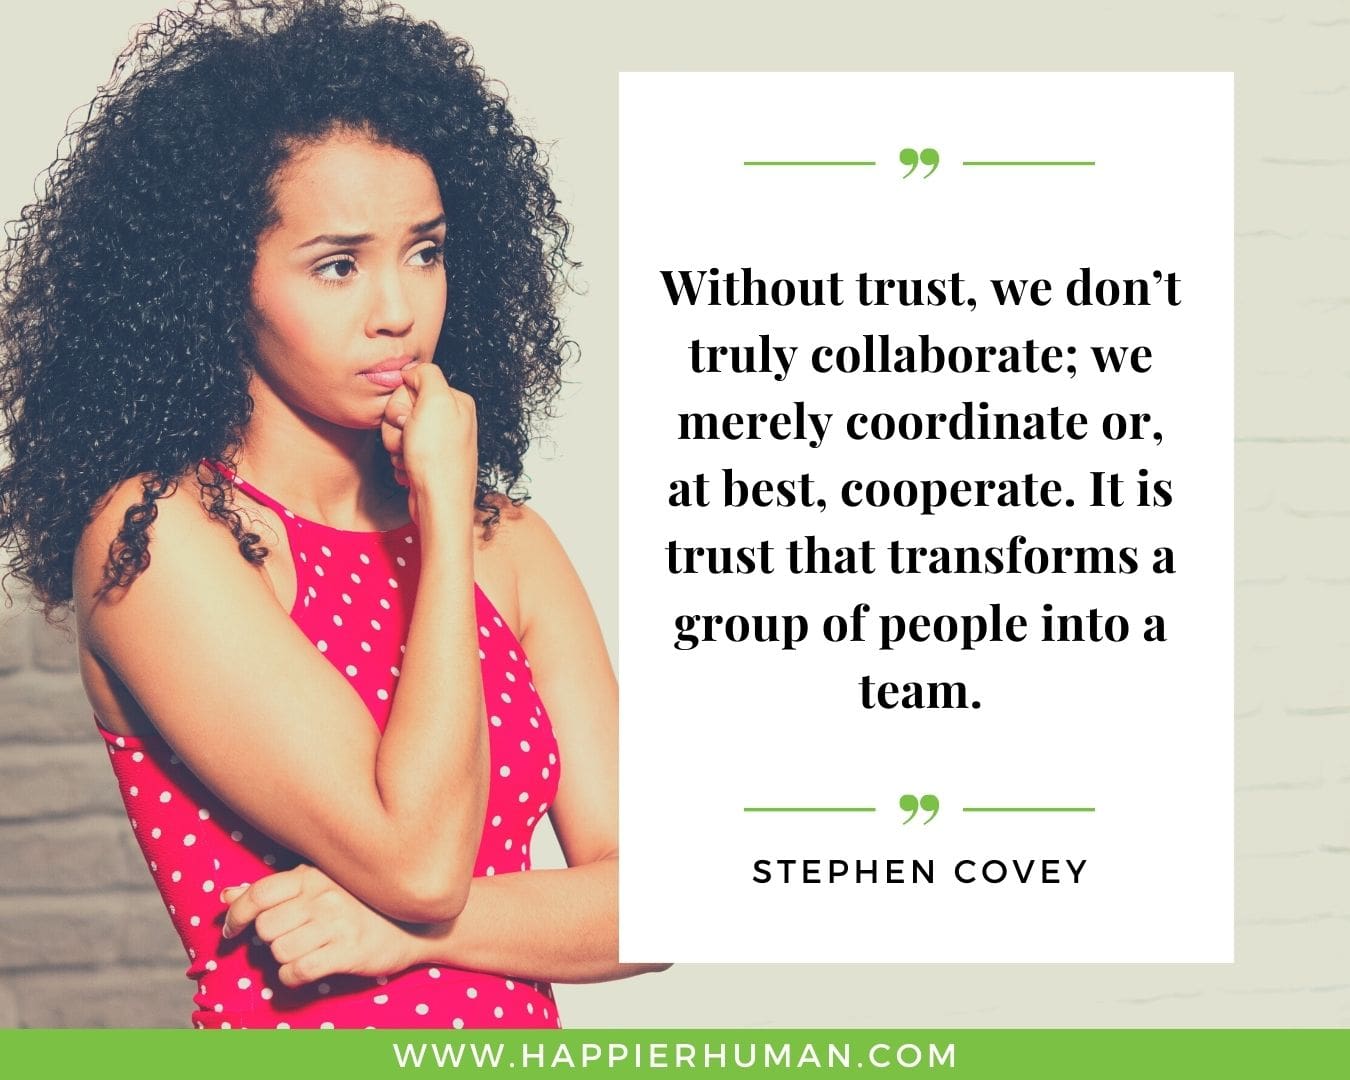 Broken Trust Quotes - “Without trust, we don’t truly collaborate; we merely coordinate or, at best, cooperate. It is trust that transforms a group of people into a team.” - Stephen Covey